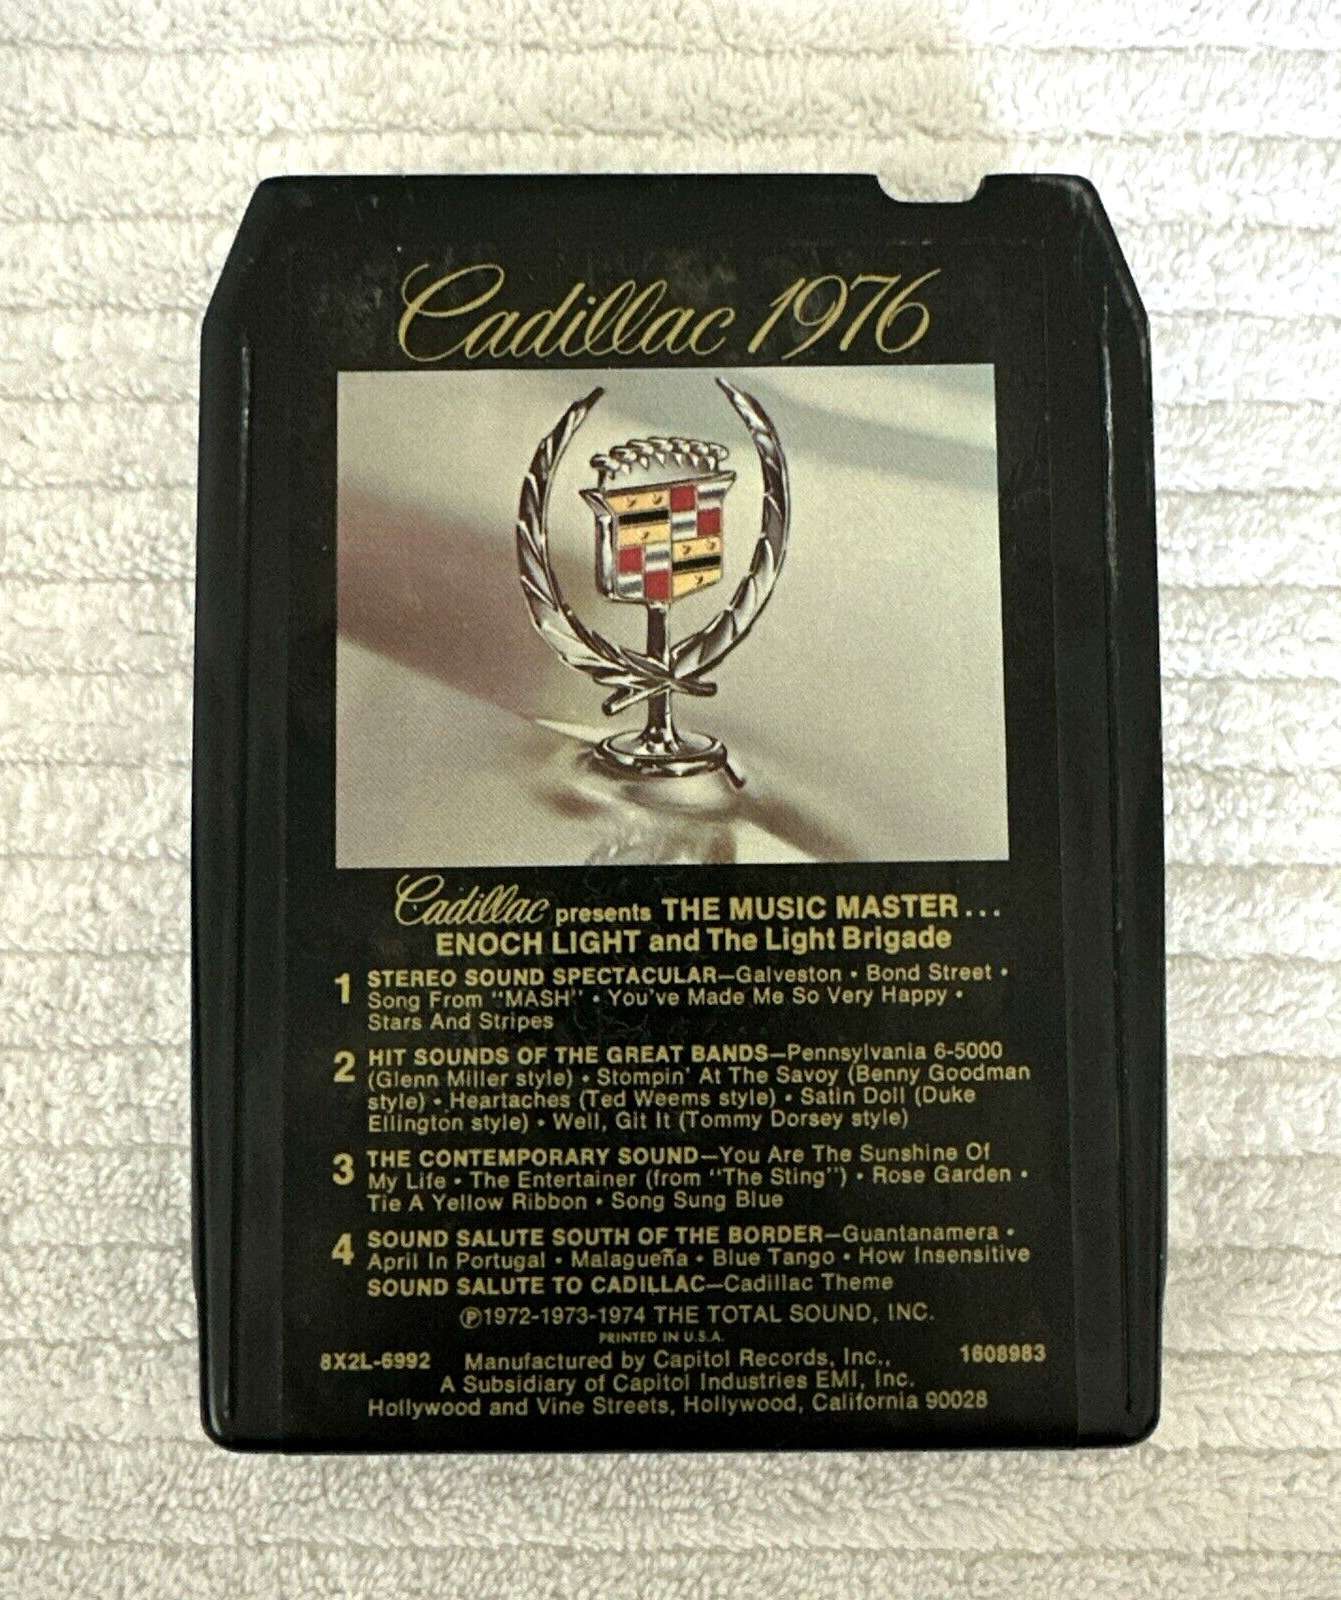 1976 Cadillac 8-Track Tape Excellent Vintage Condition Glovebox Demo Works Great